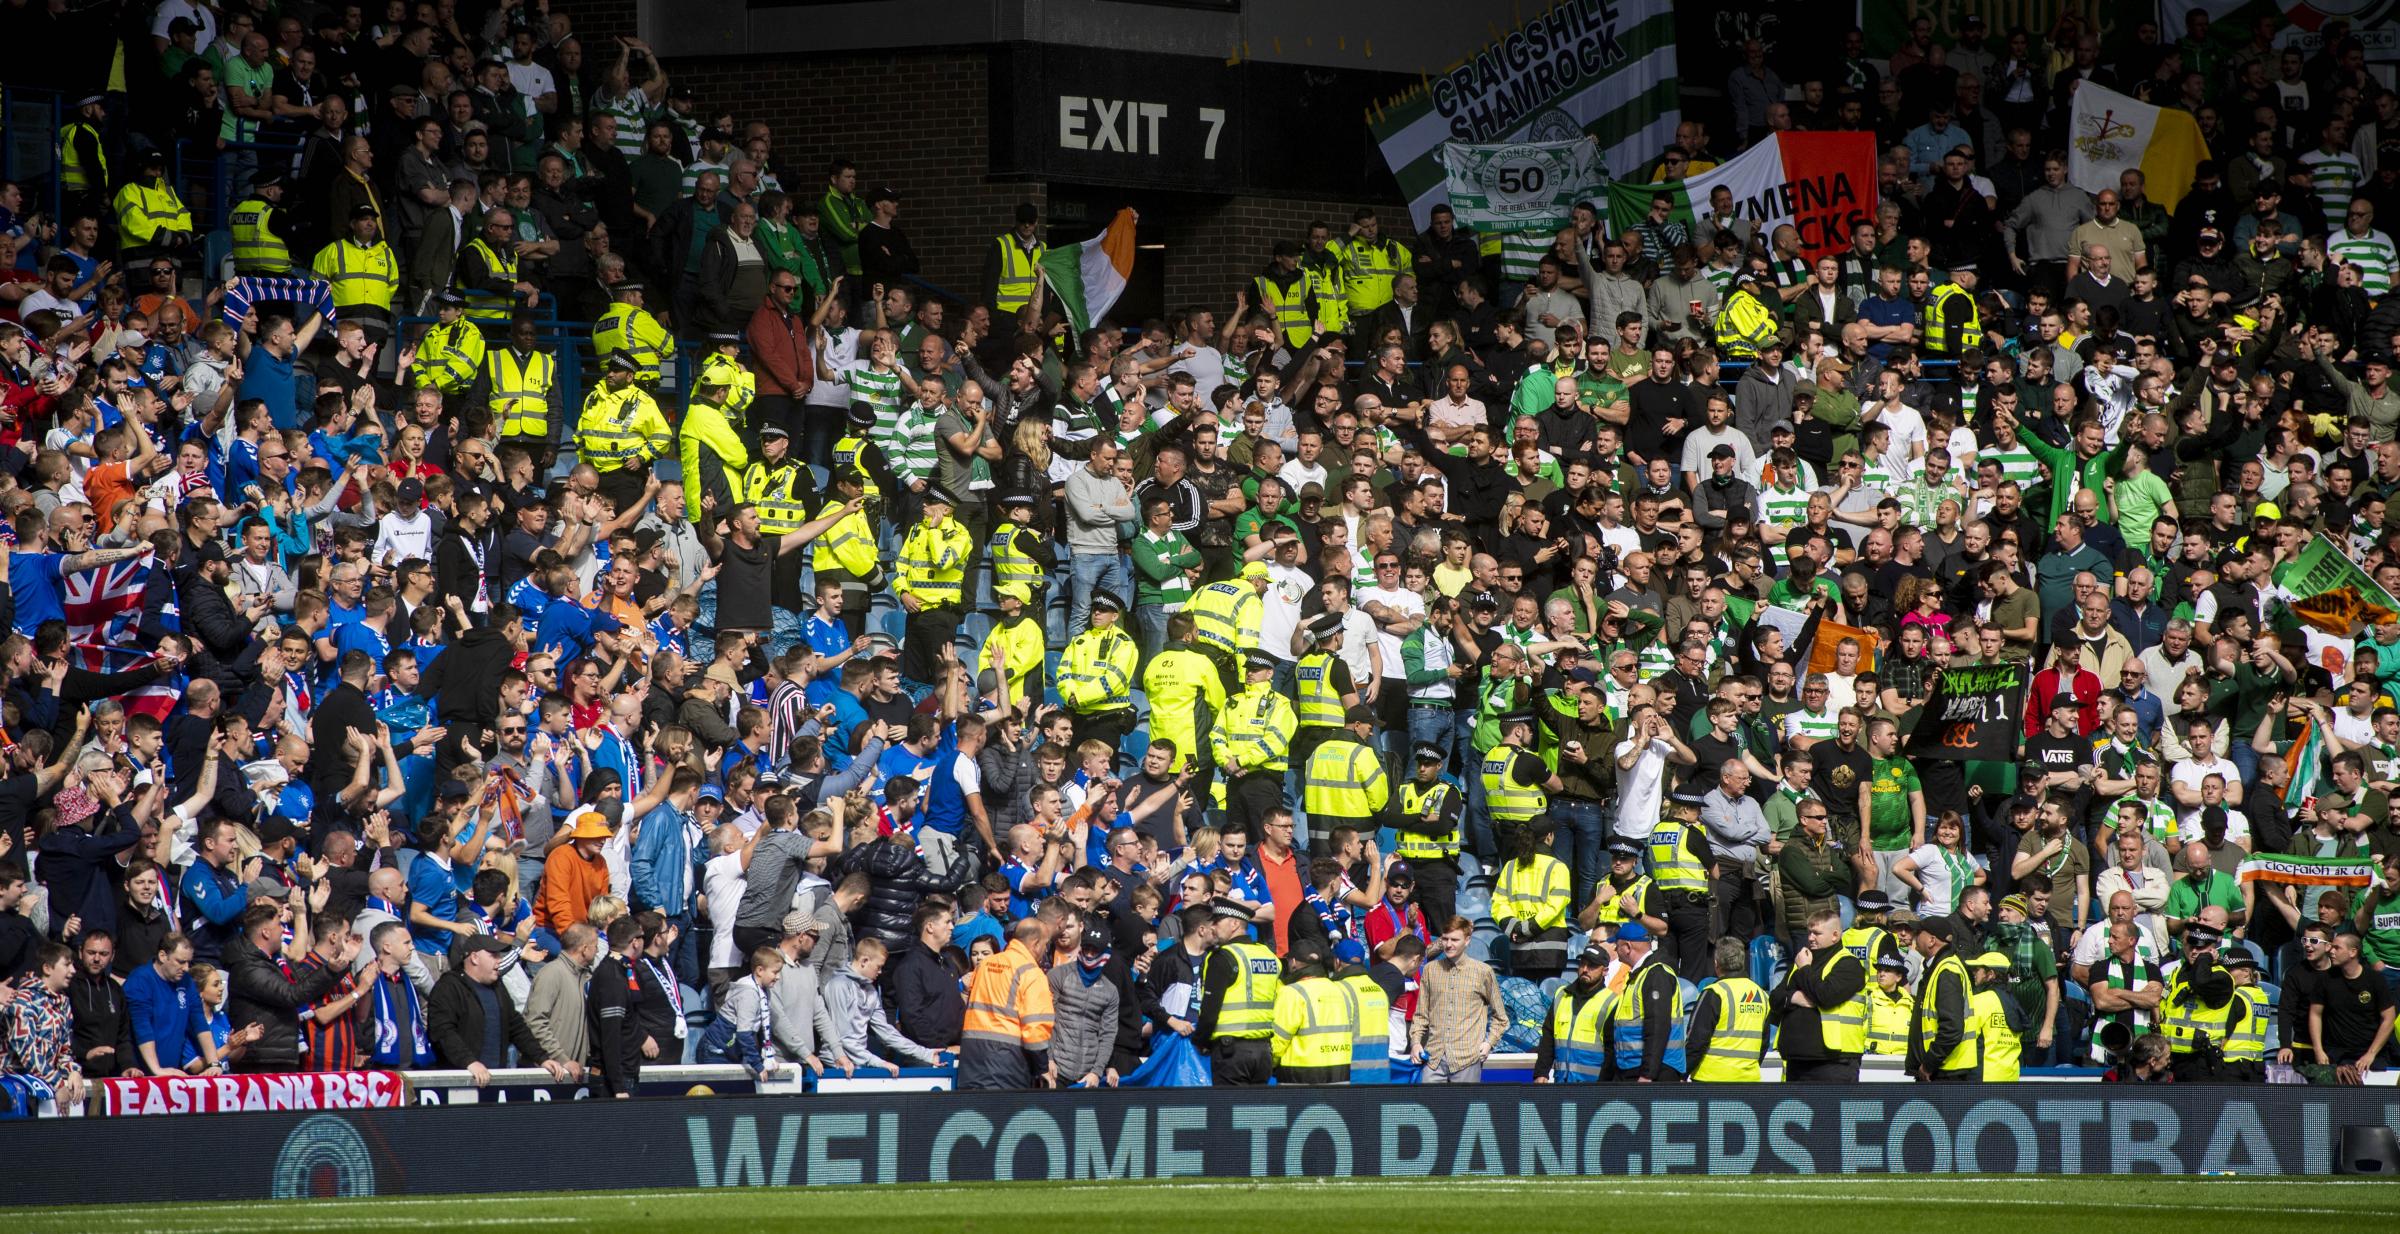 No return for Rangers and Celtic fans until lockdown is lifted